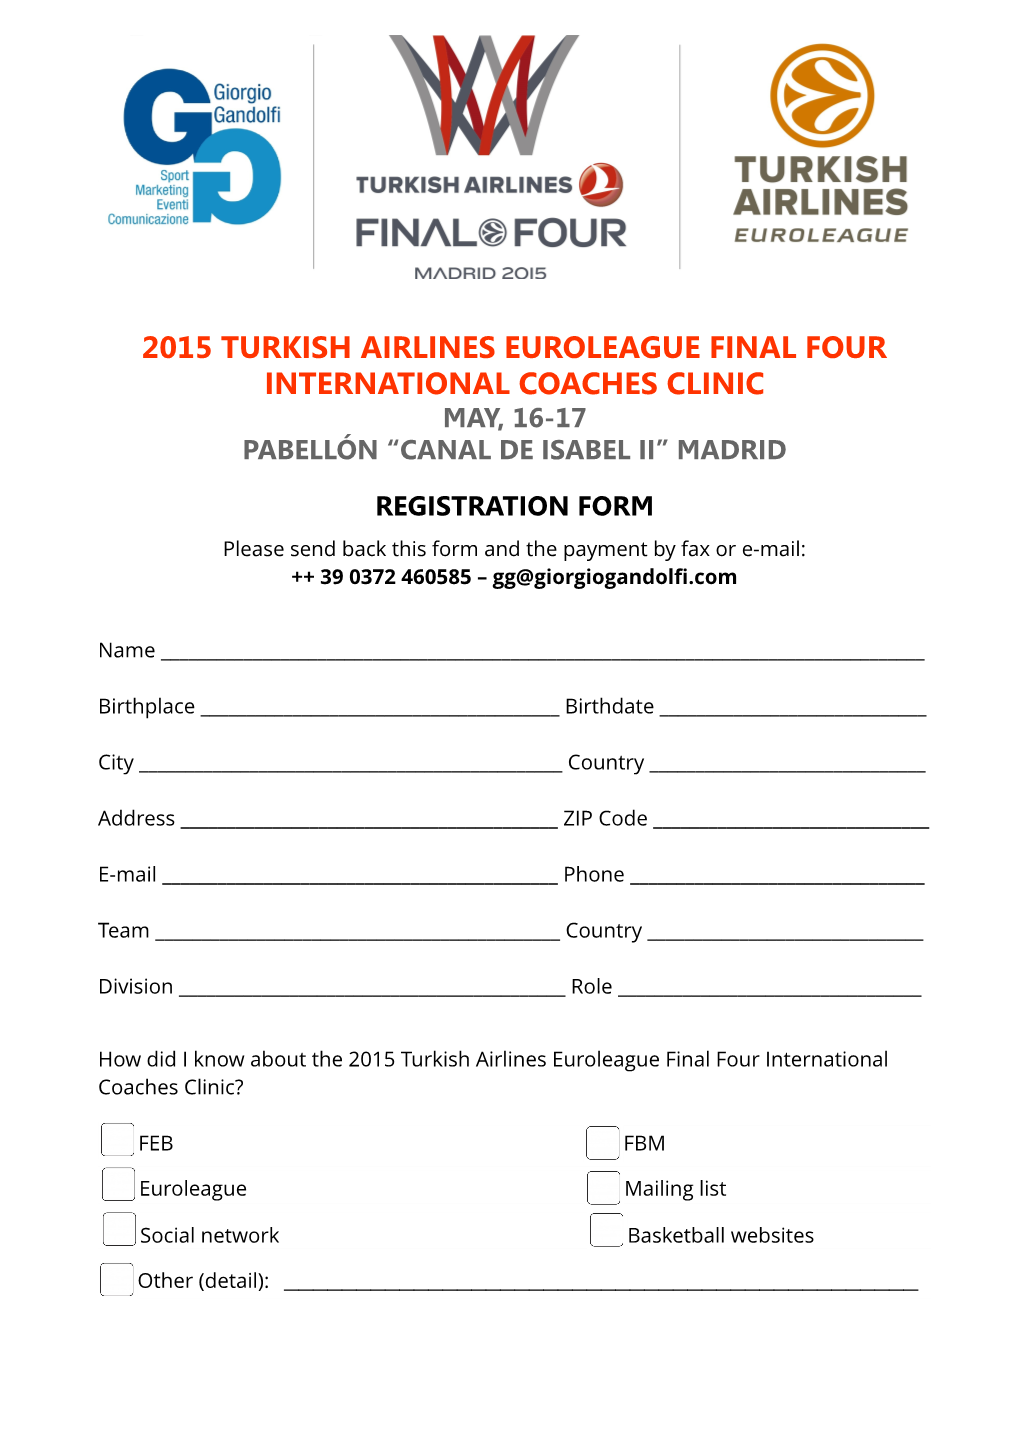 2015 Turkish Airlines Euroleague Final Four International Coaches Clinic May, 16-17 Pabellón “Canal De Isabel Ii” Madrid